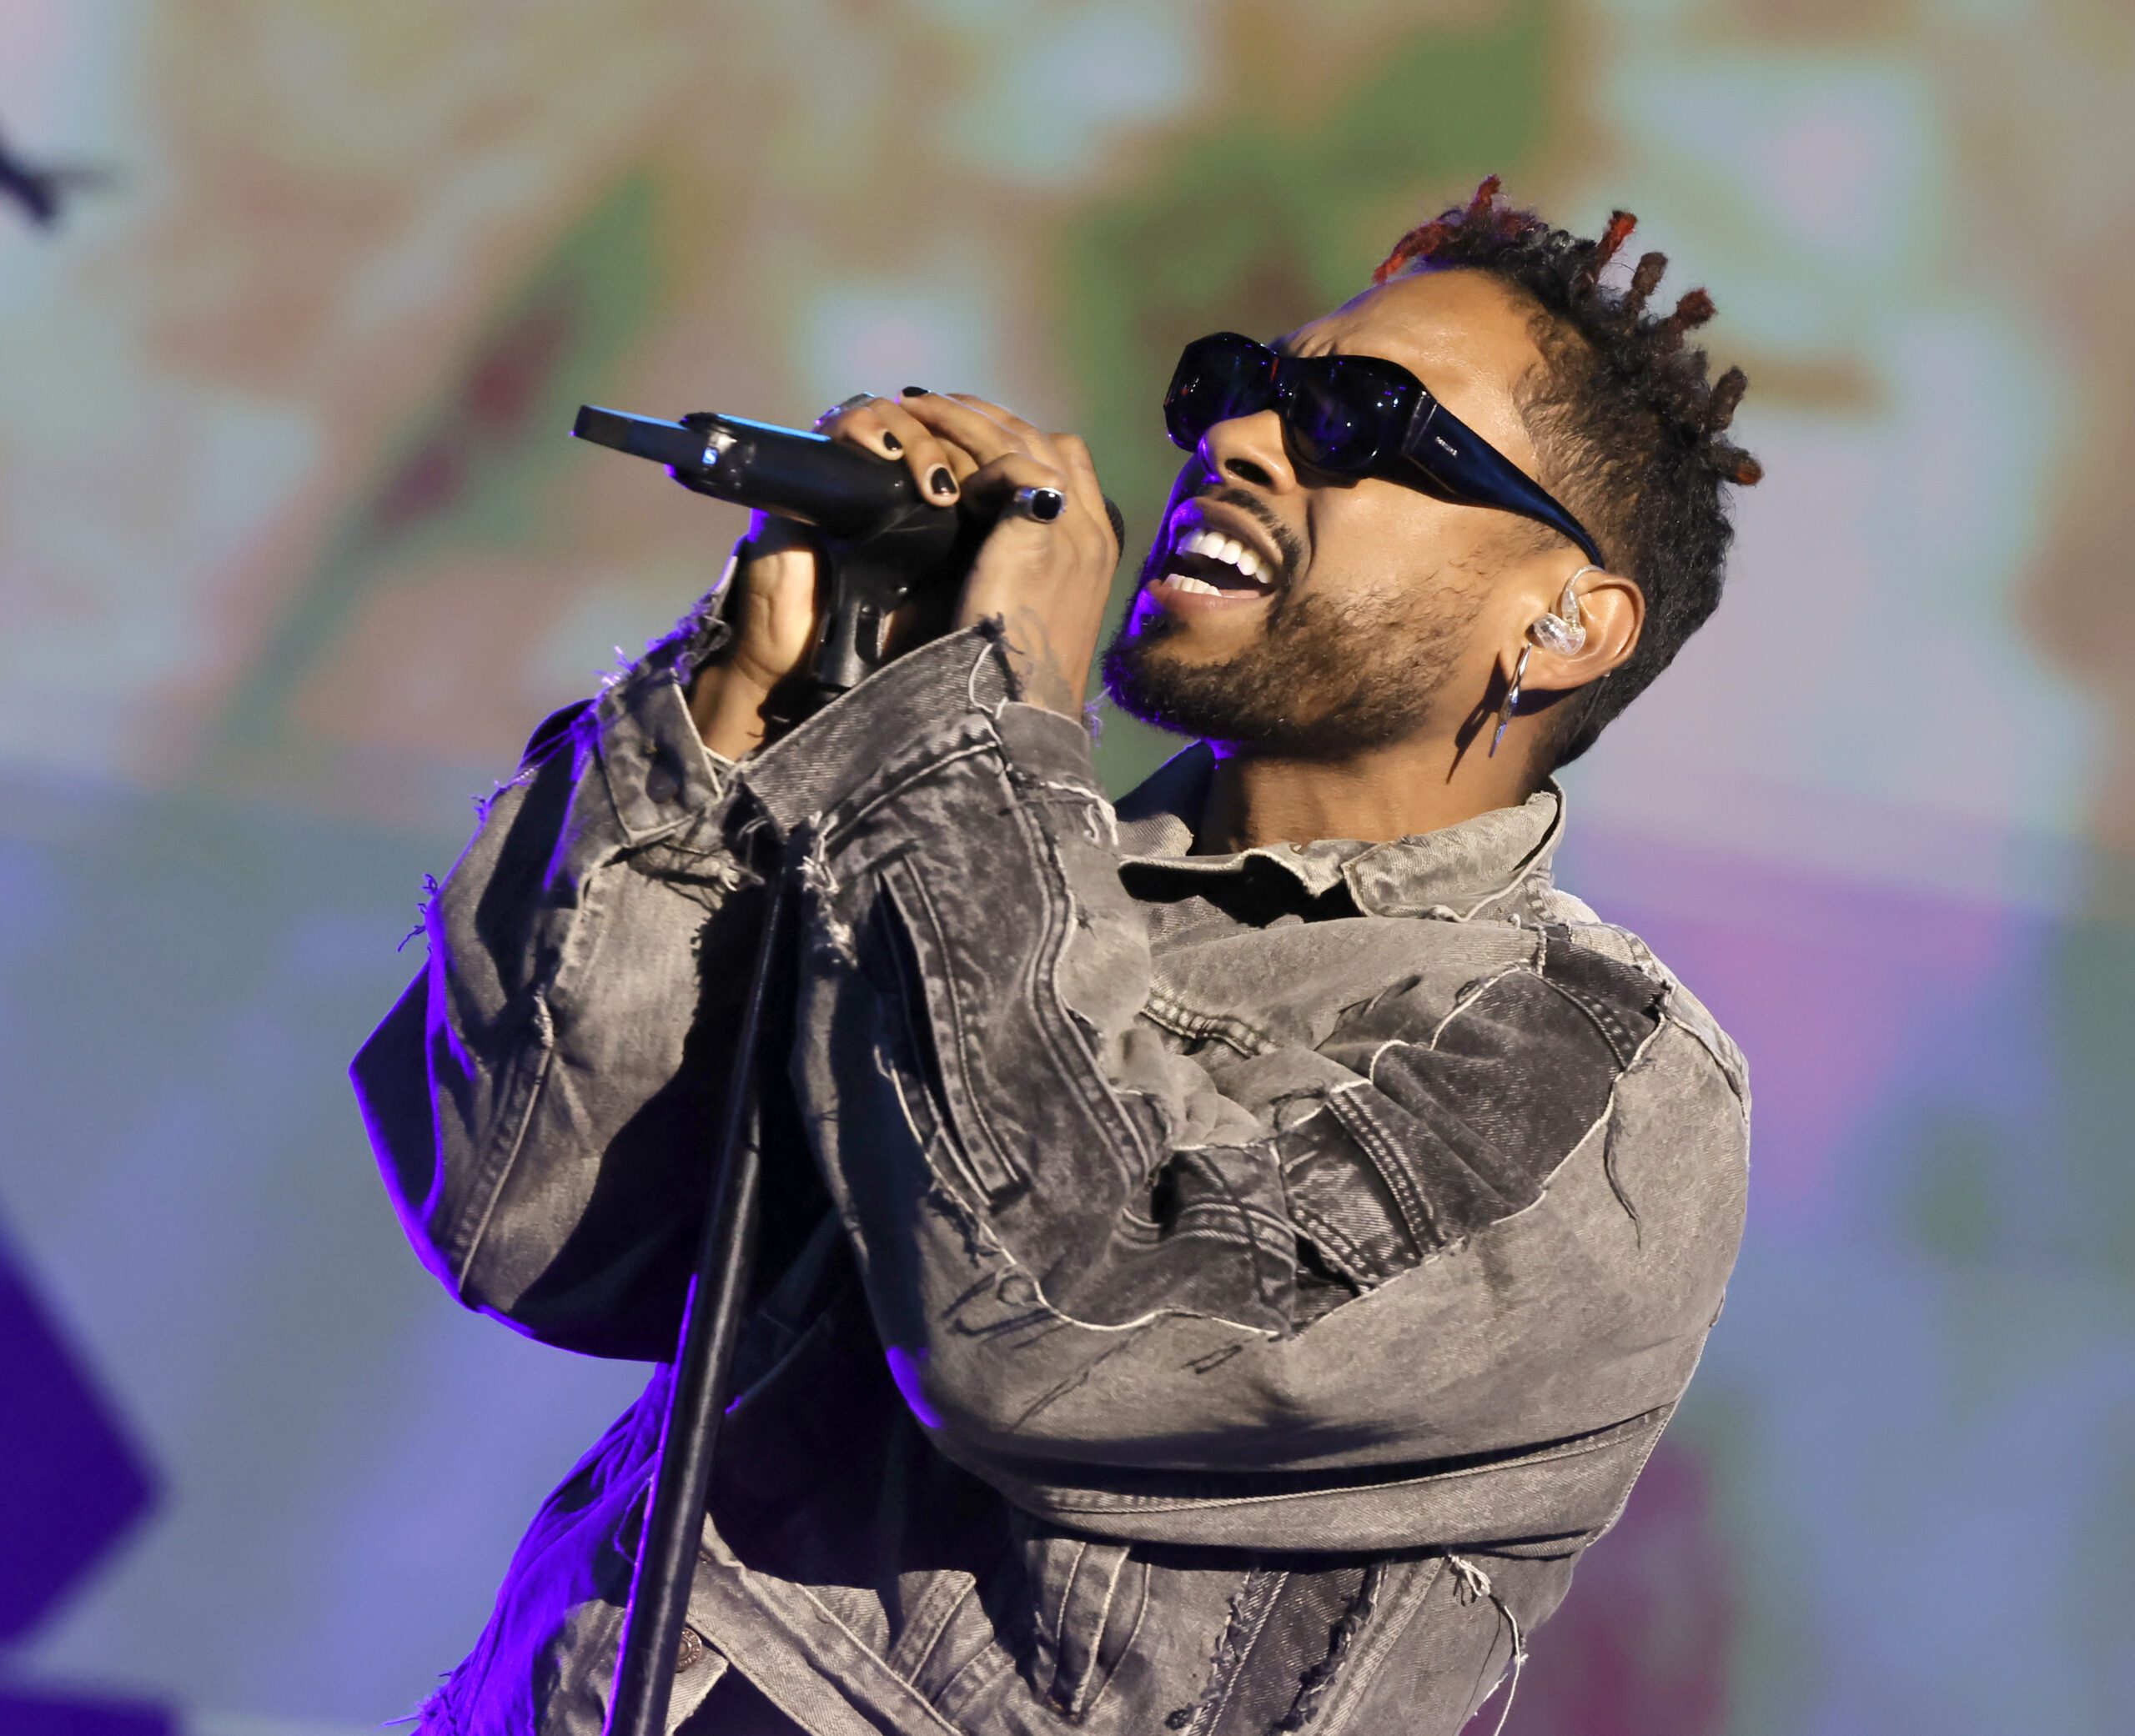 INGLEWOOD, CALIFORNIA - AUGUST 02: (FOR EDITORIAL USE ONLY) In this image released on August 2, Miguel performs onstage during a taping of iHeartRadio Living Black! 2023 in Inglewood, California. (Photo by Kevin Winter/Getty Images for iHeartRadio )